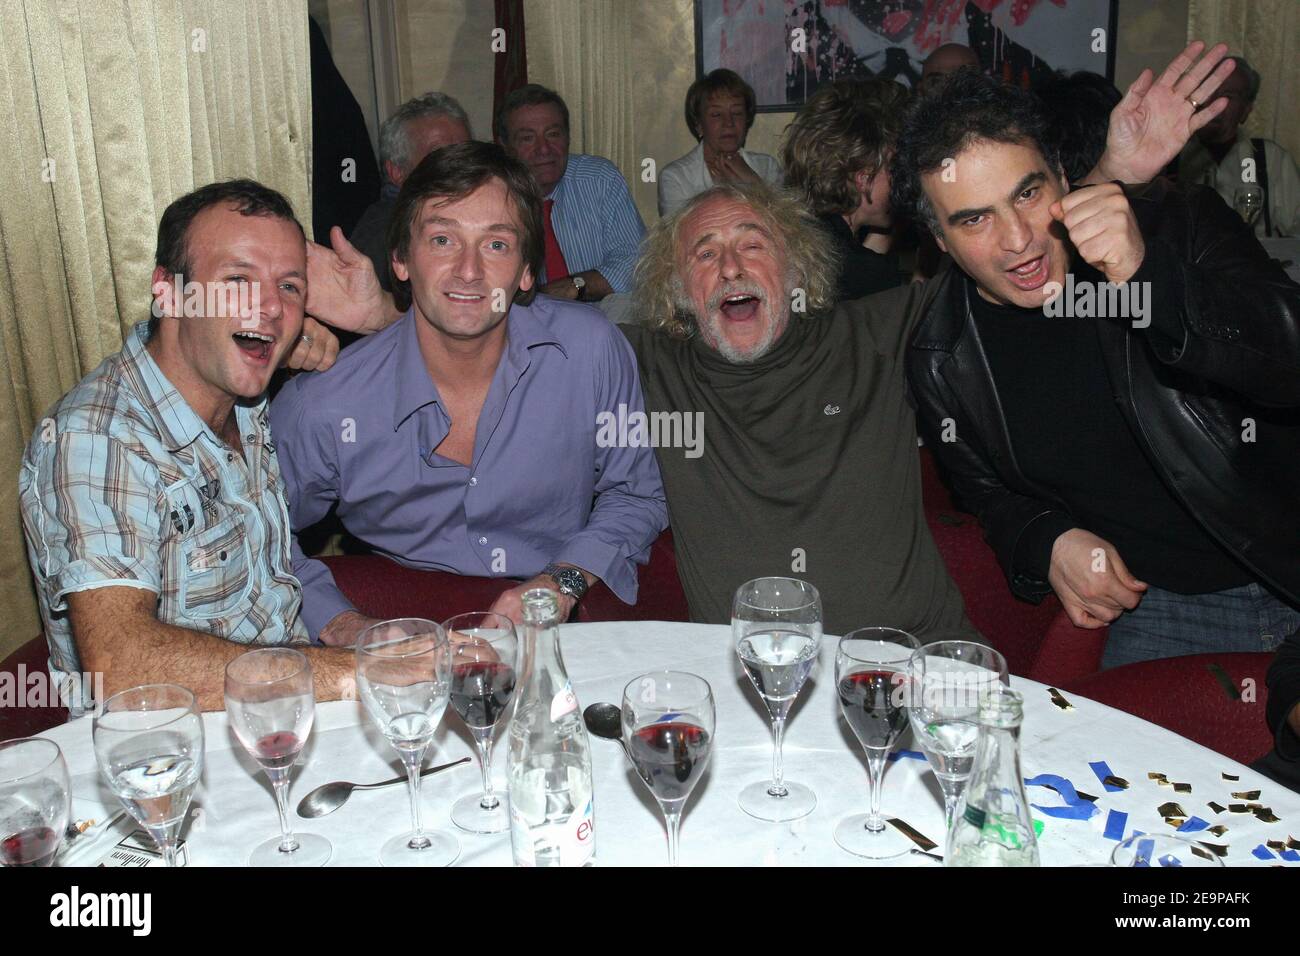 French actors Pierre-Francois Martin-Laval, Pierre Palmade, Pierre Richard and French humorist Raphael Mezrahi celebrate the 50th representation of the play 'Pierre et Fils' at the club 'L'Etoile' in Paris, France, on November 17, 2006. Photo by Benoit Pinguet/ABACAPRESS.COM Stock Photo